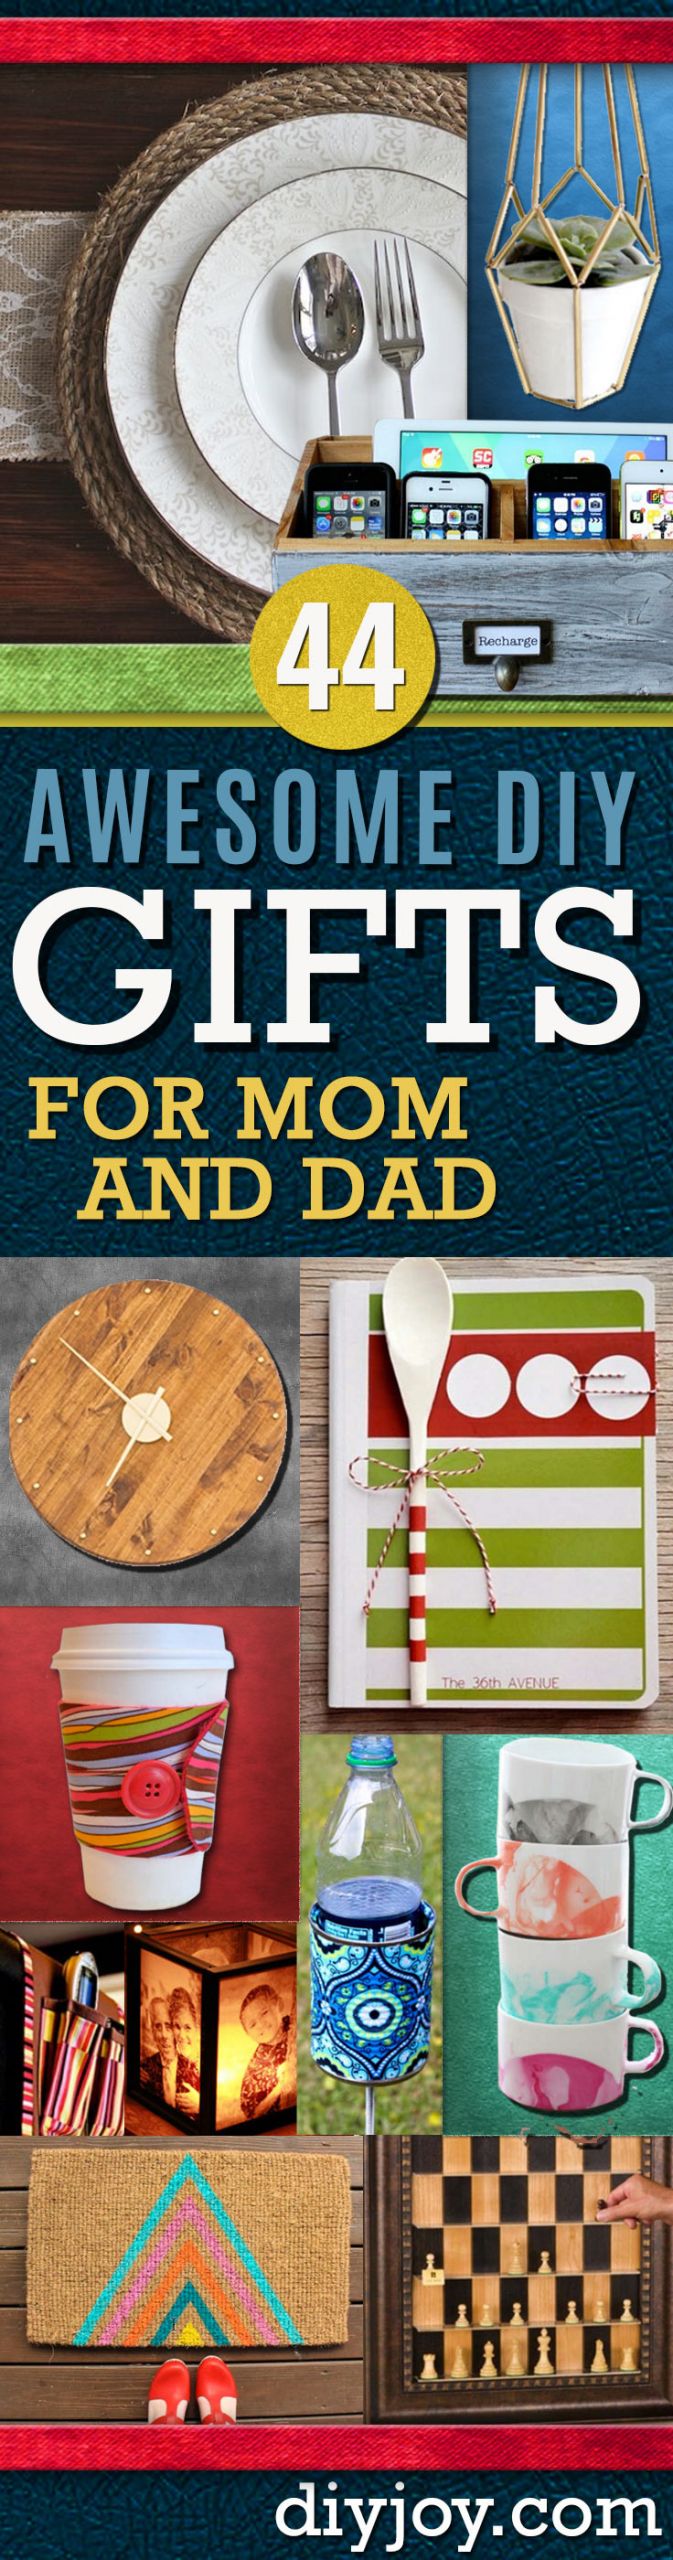 DIY Christmas Presents For Mom
 Awesome DIY Gift Ideas Mom and Dad Will Love